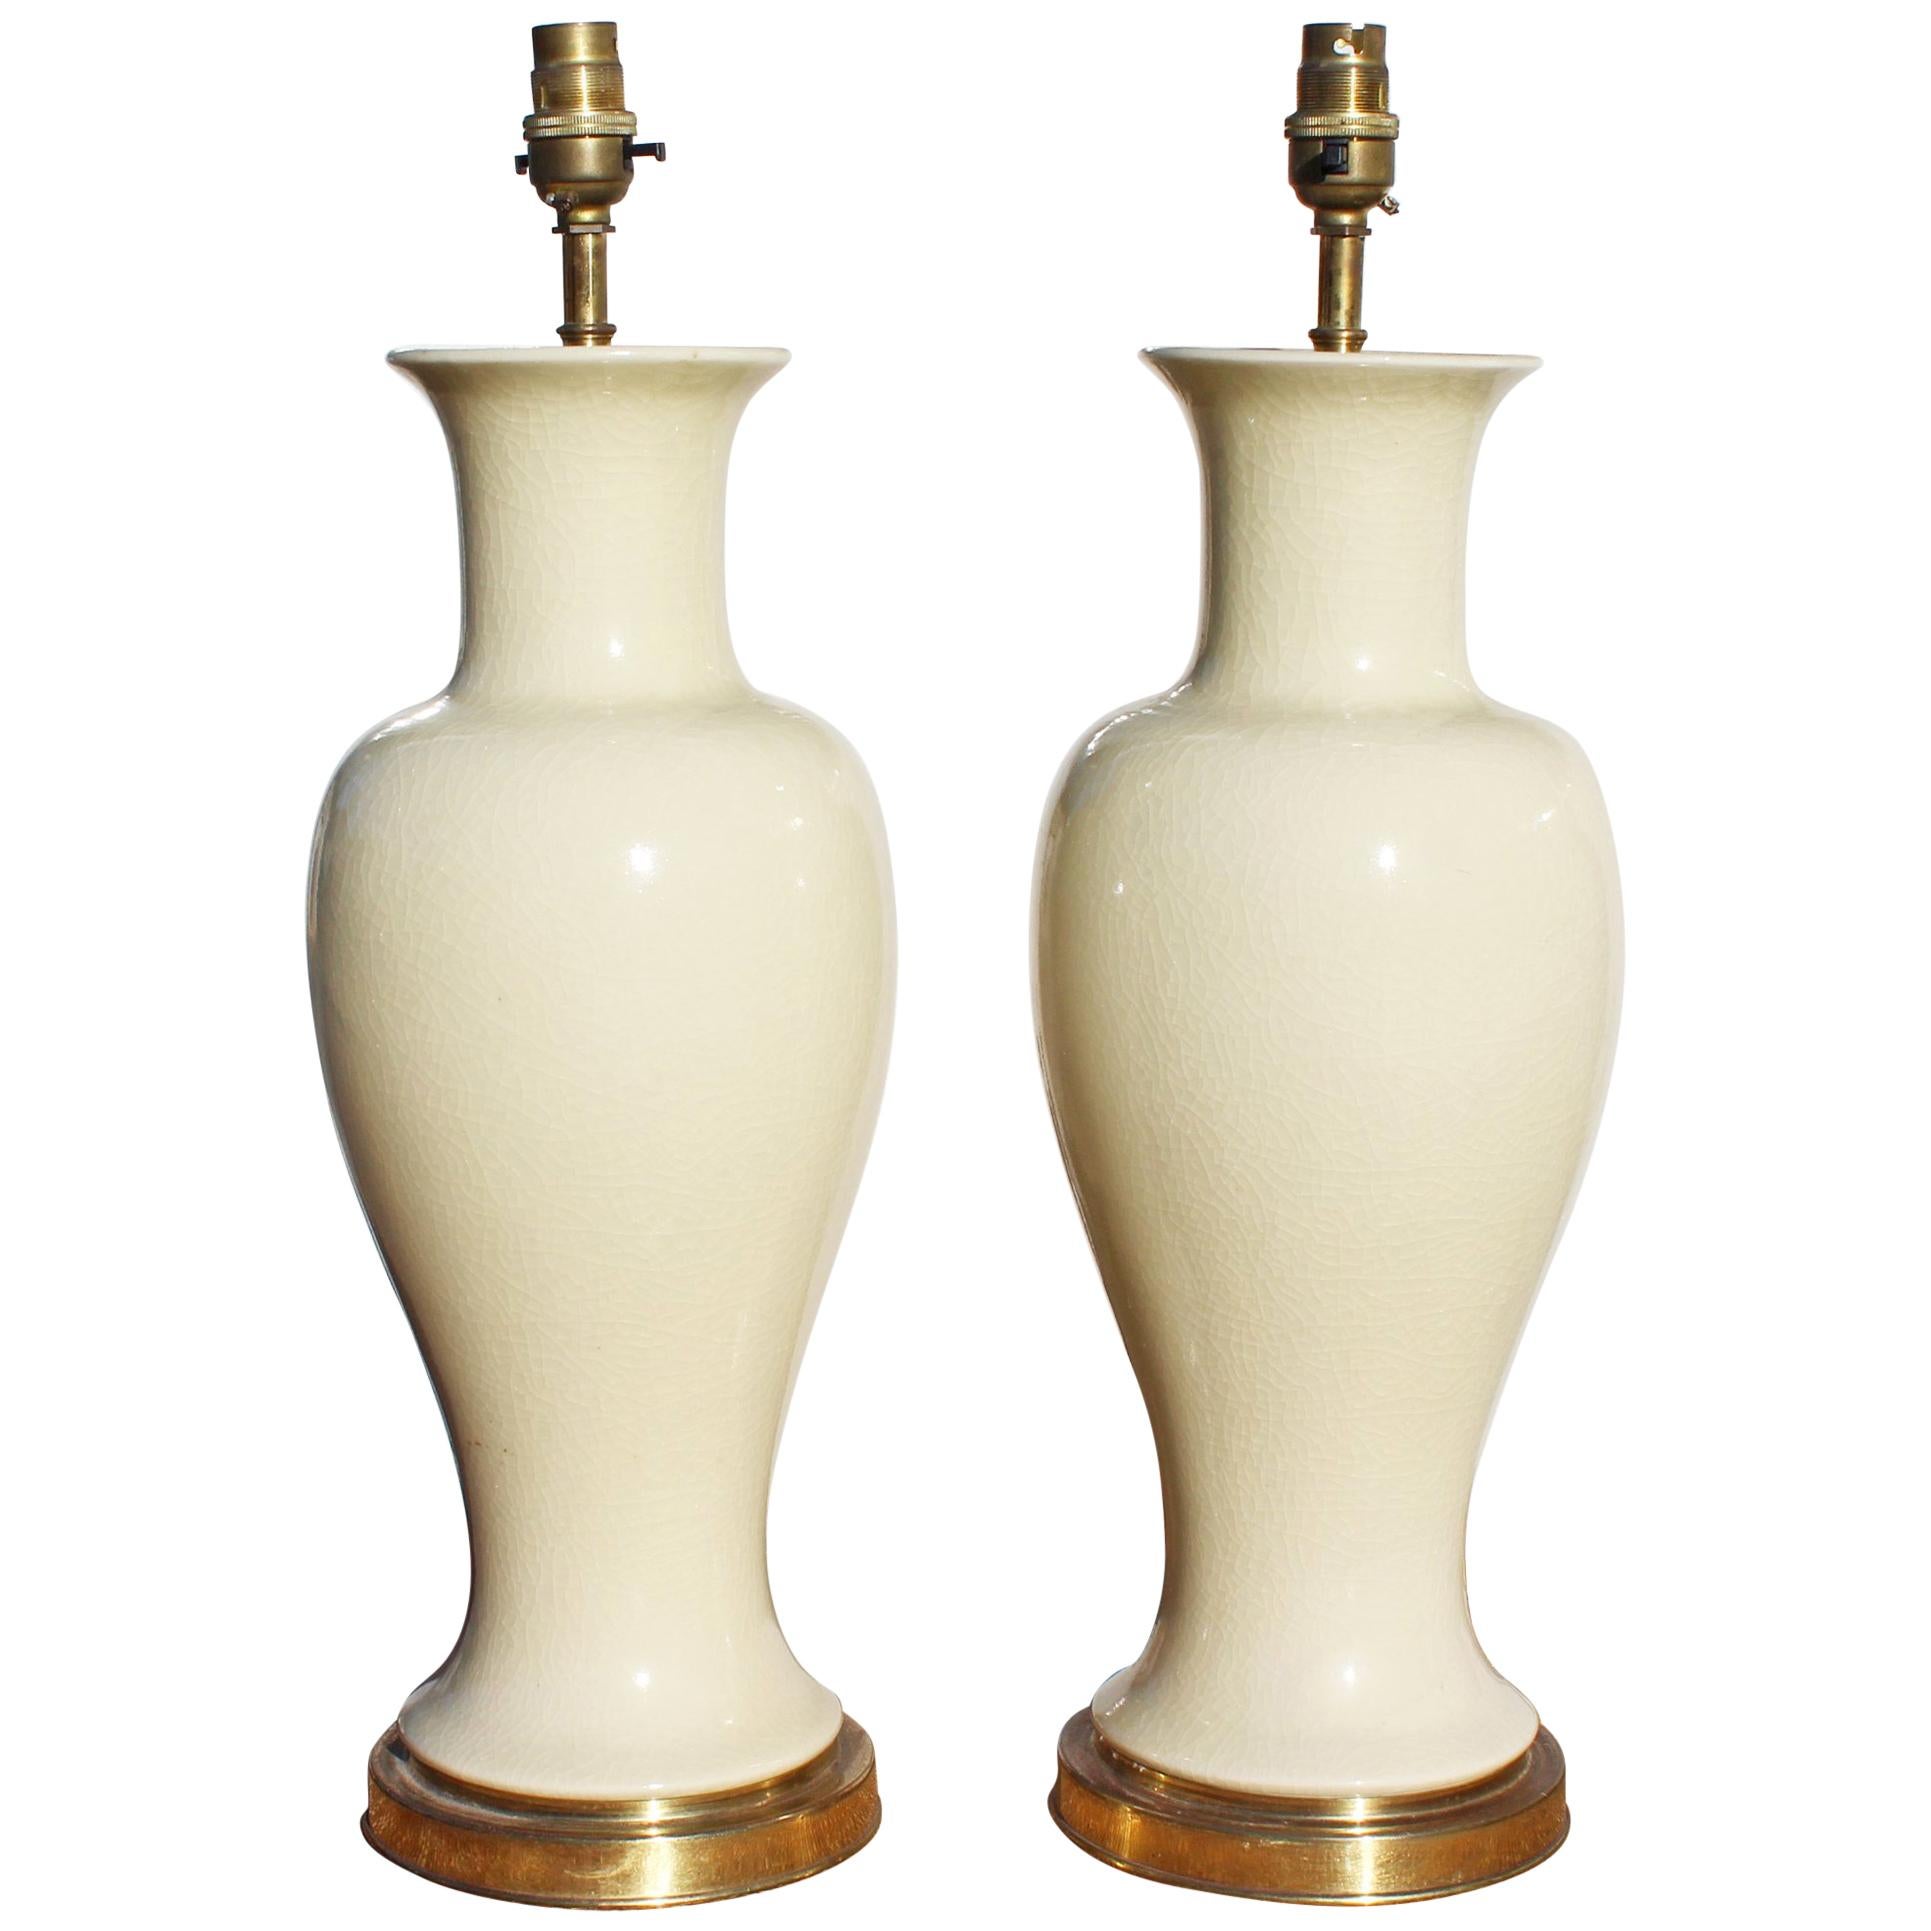 1970s Pair of English White Ceramic Table Lamps Signed "Mehorney"